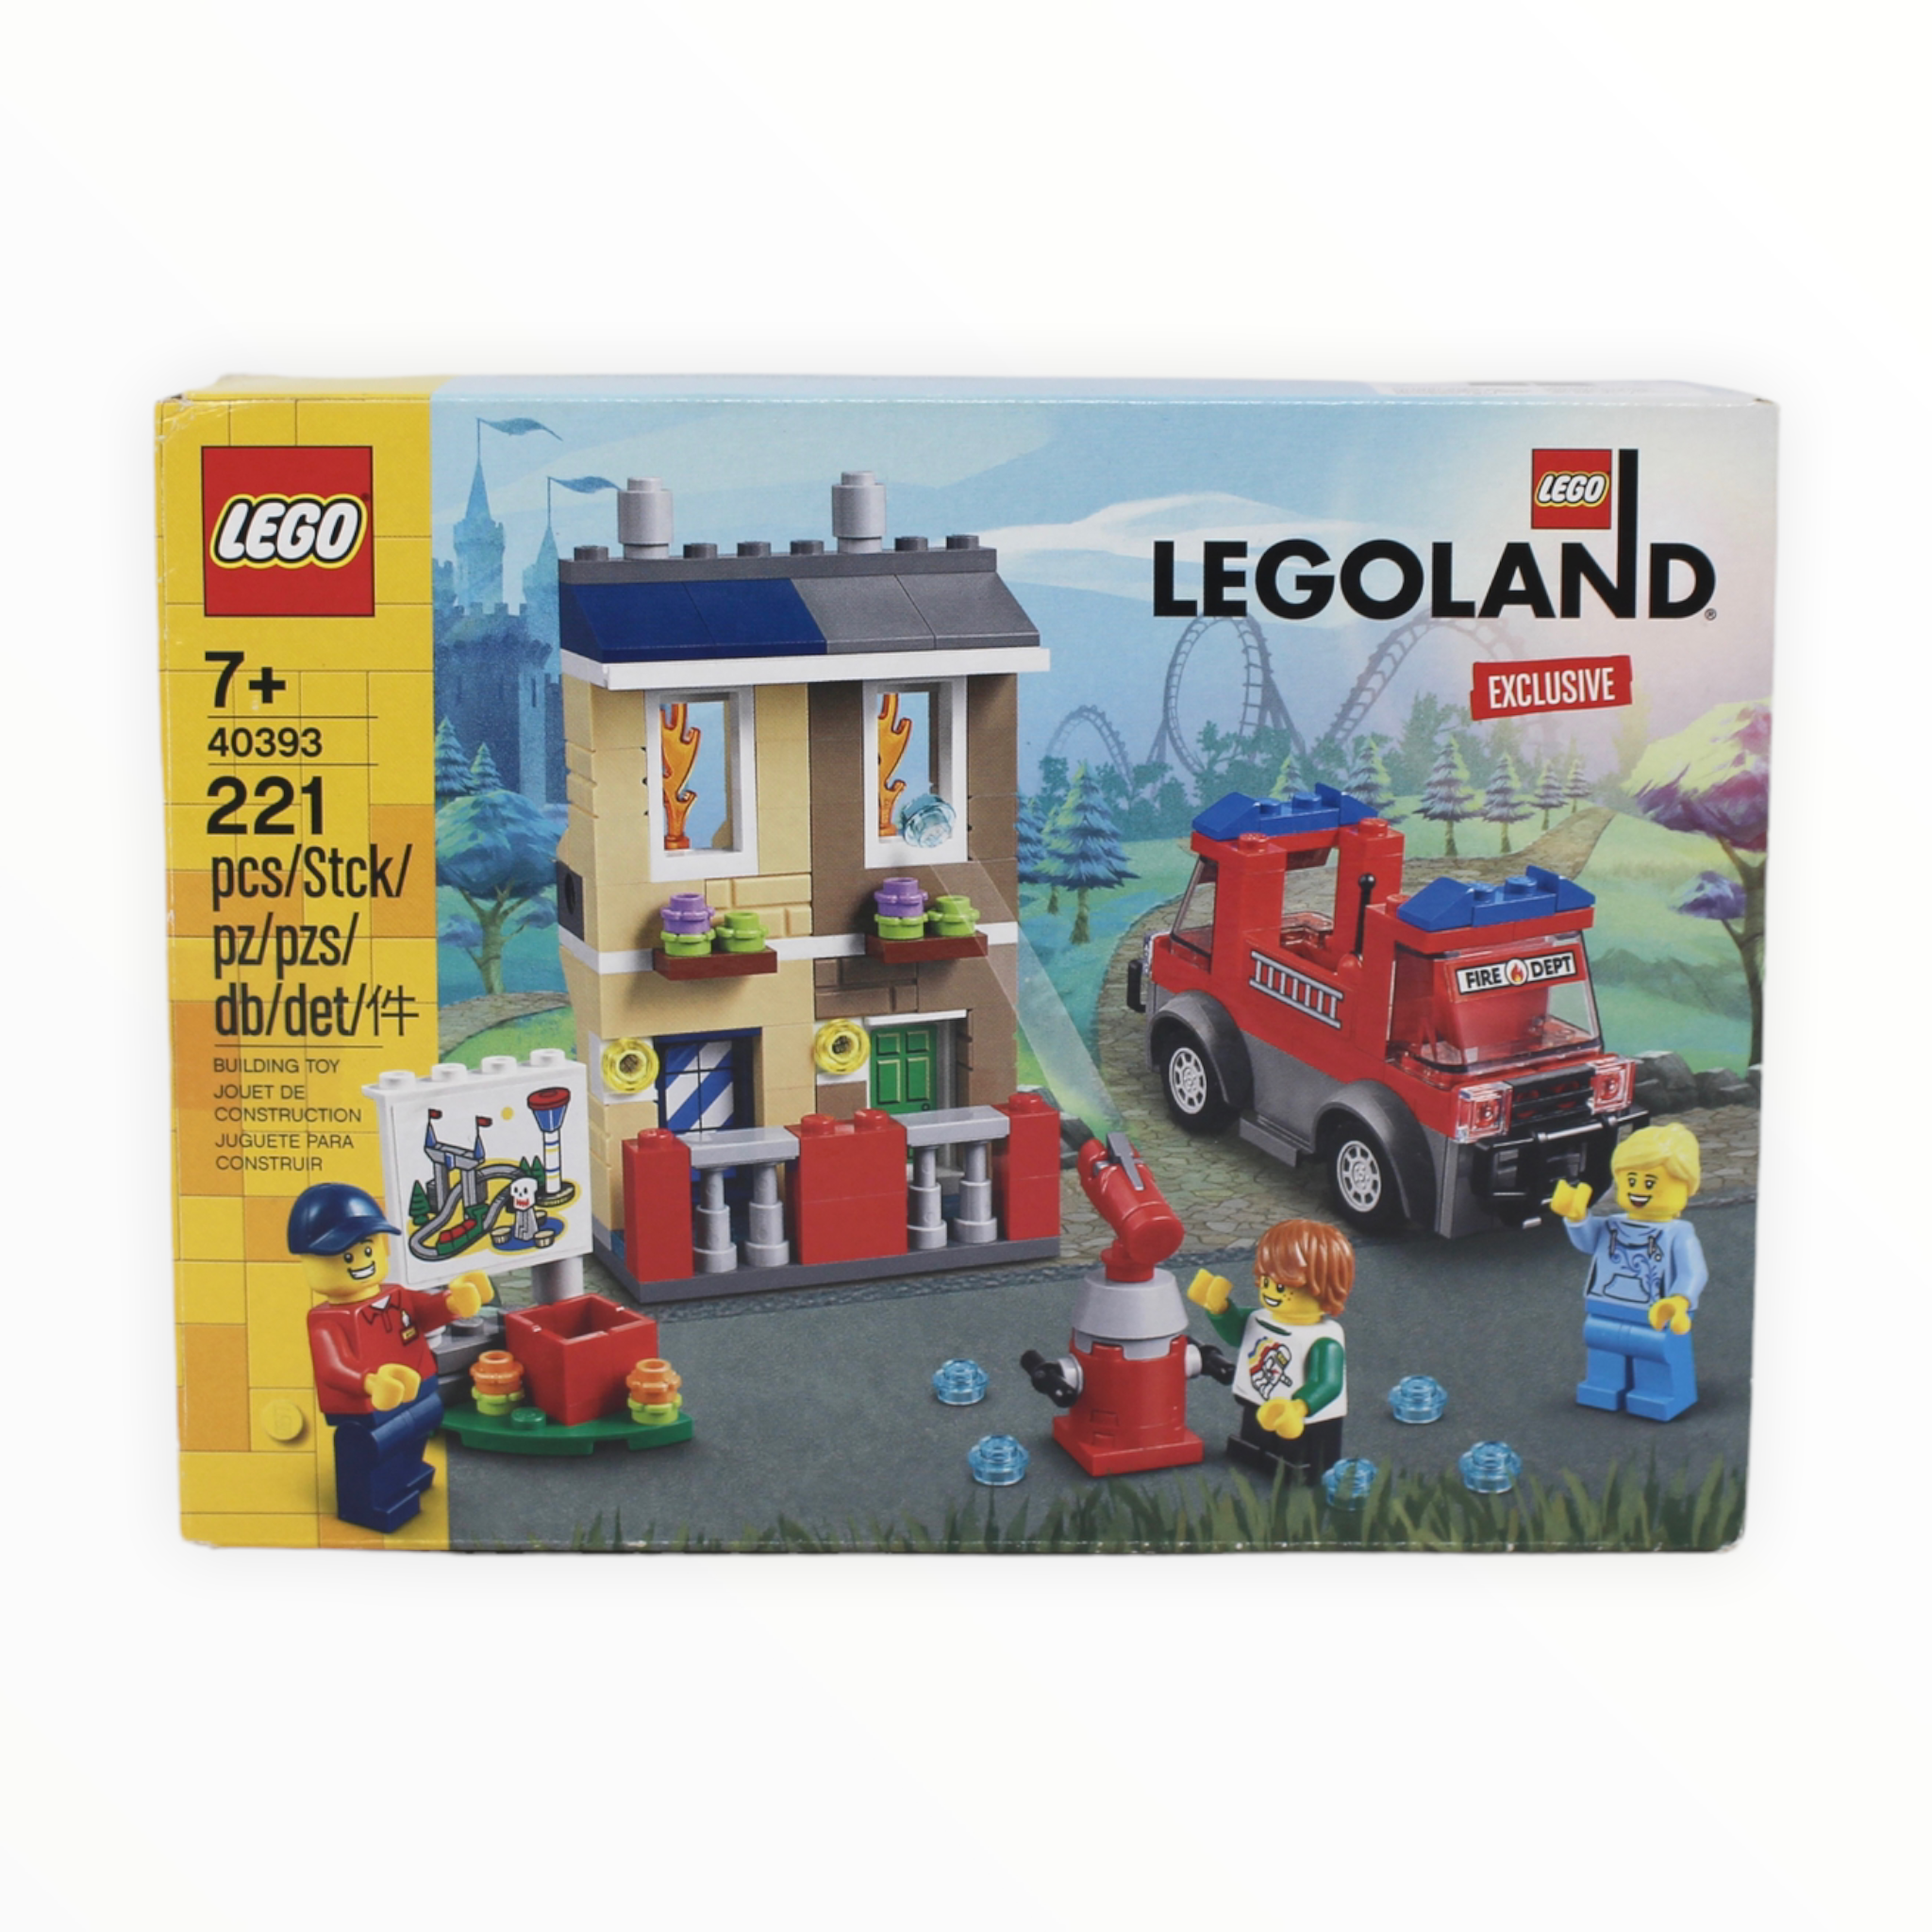 Certified Used Set 40393 Legoland Fire Academy